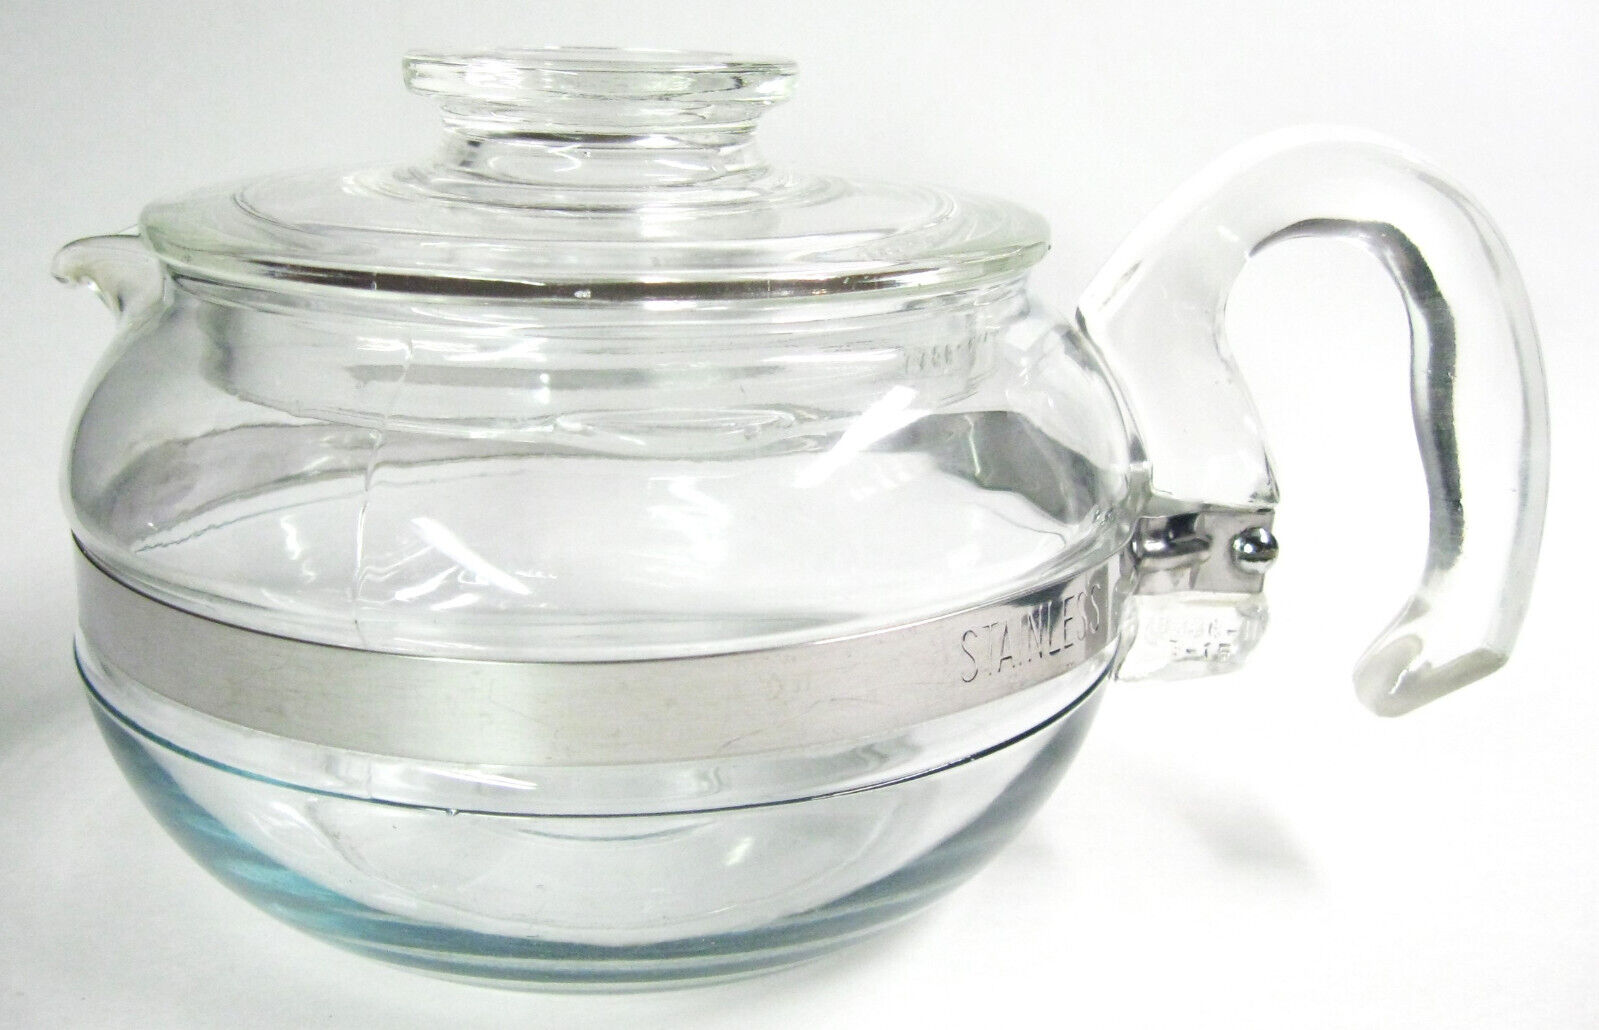 Exc Cond Vintage 1950s-70s Pyrex Flameware Glass Teapot, 6 Cup, Squeaky Clean